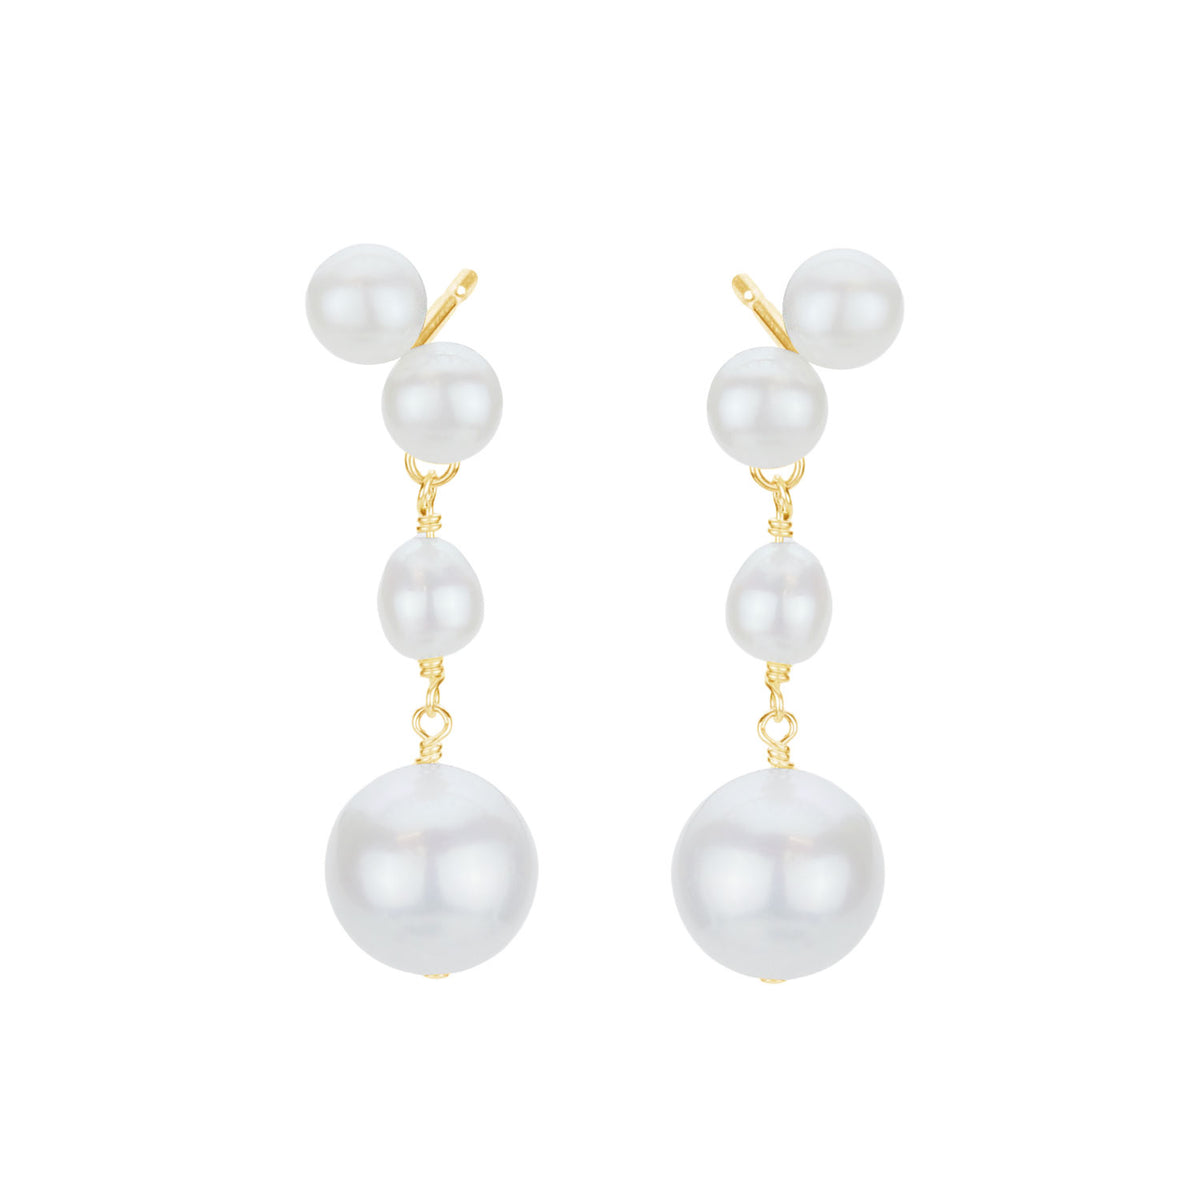 Double Pearl Studs with Pearl Drop Earrings